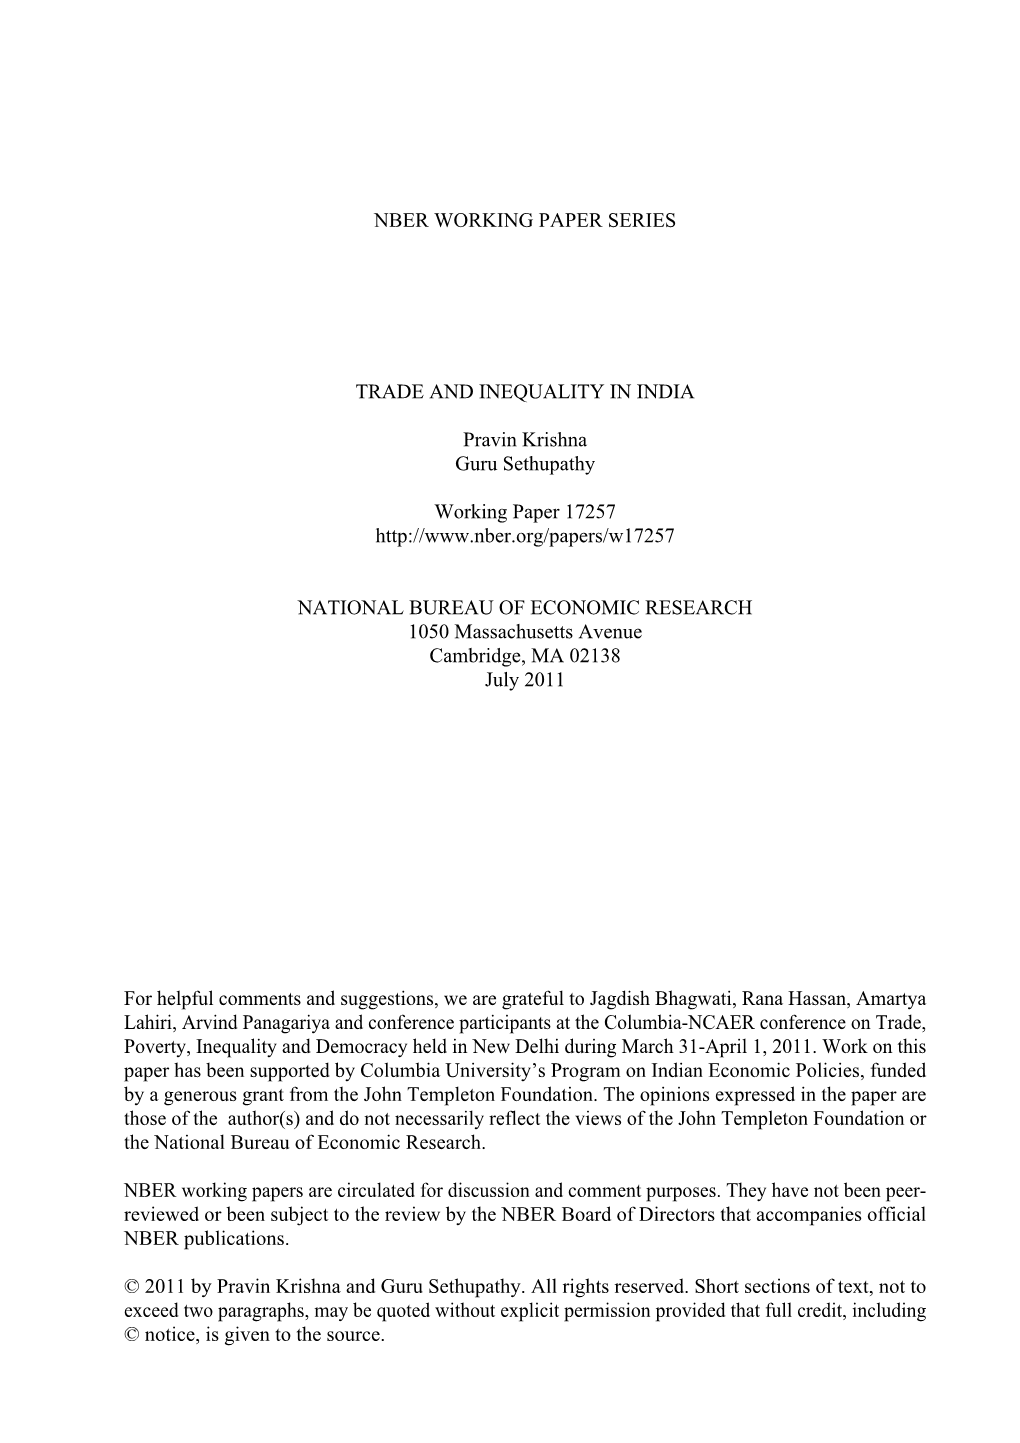 Nber Working Paper Series Trade and Inequality in India